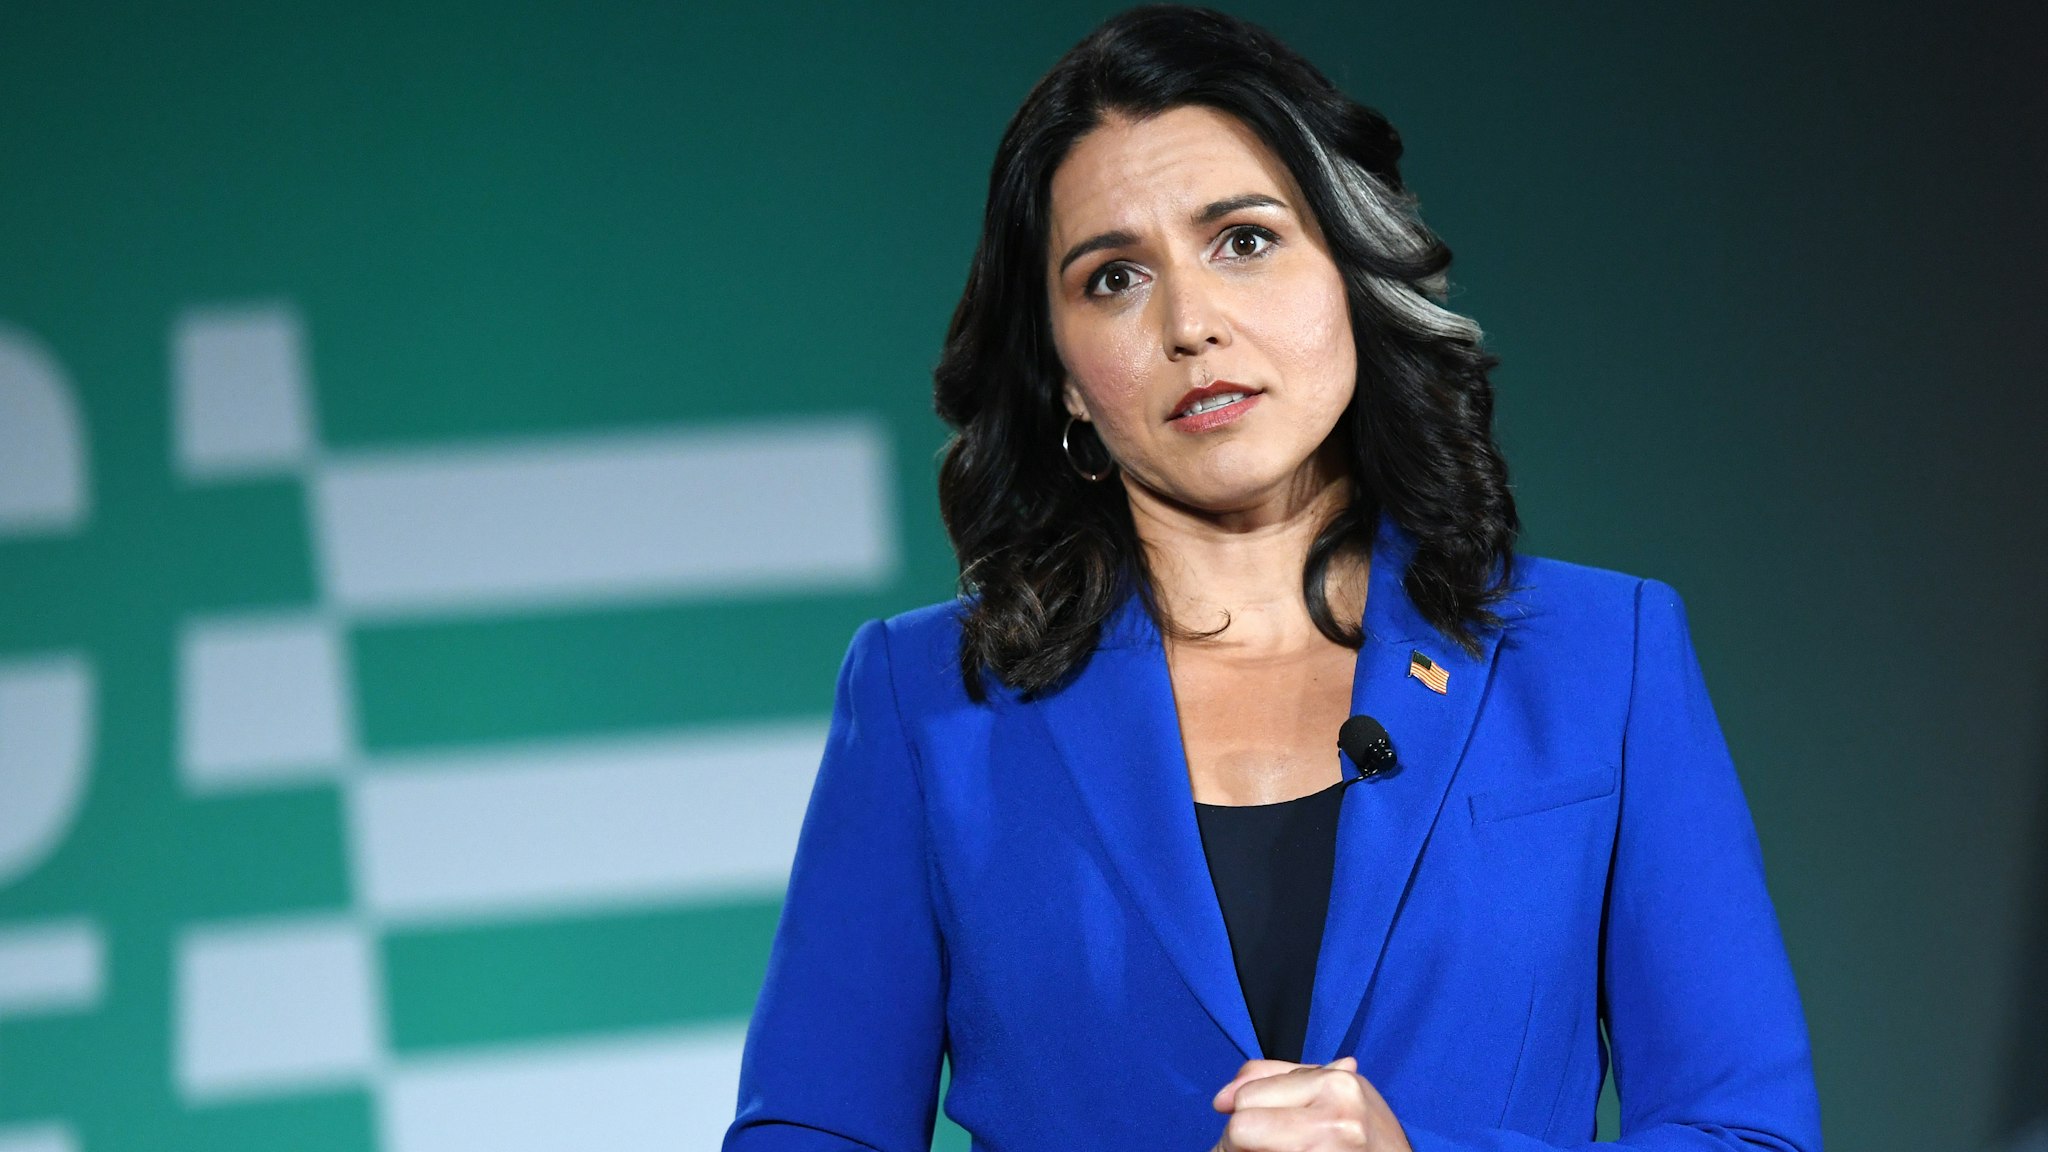 LAS VEGAS, NEVADA - AUGUST 03: Democratic presidential candidate and U.S. Rep. Tulsi Gabbard (D-HI) speaks during the 2020 Public Service Forum hosted by the American Federation of State, County and Municipal Employees (AFSCME) at UNLV on August 3, 2019 in Las Vegas, Nevada. Nineteen of the 24 candidates running for the Democratic party's 2020 presidential nomination are addressing union members in a state with one of the largest organized labor populations in the United States.